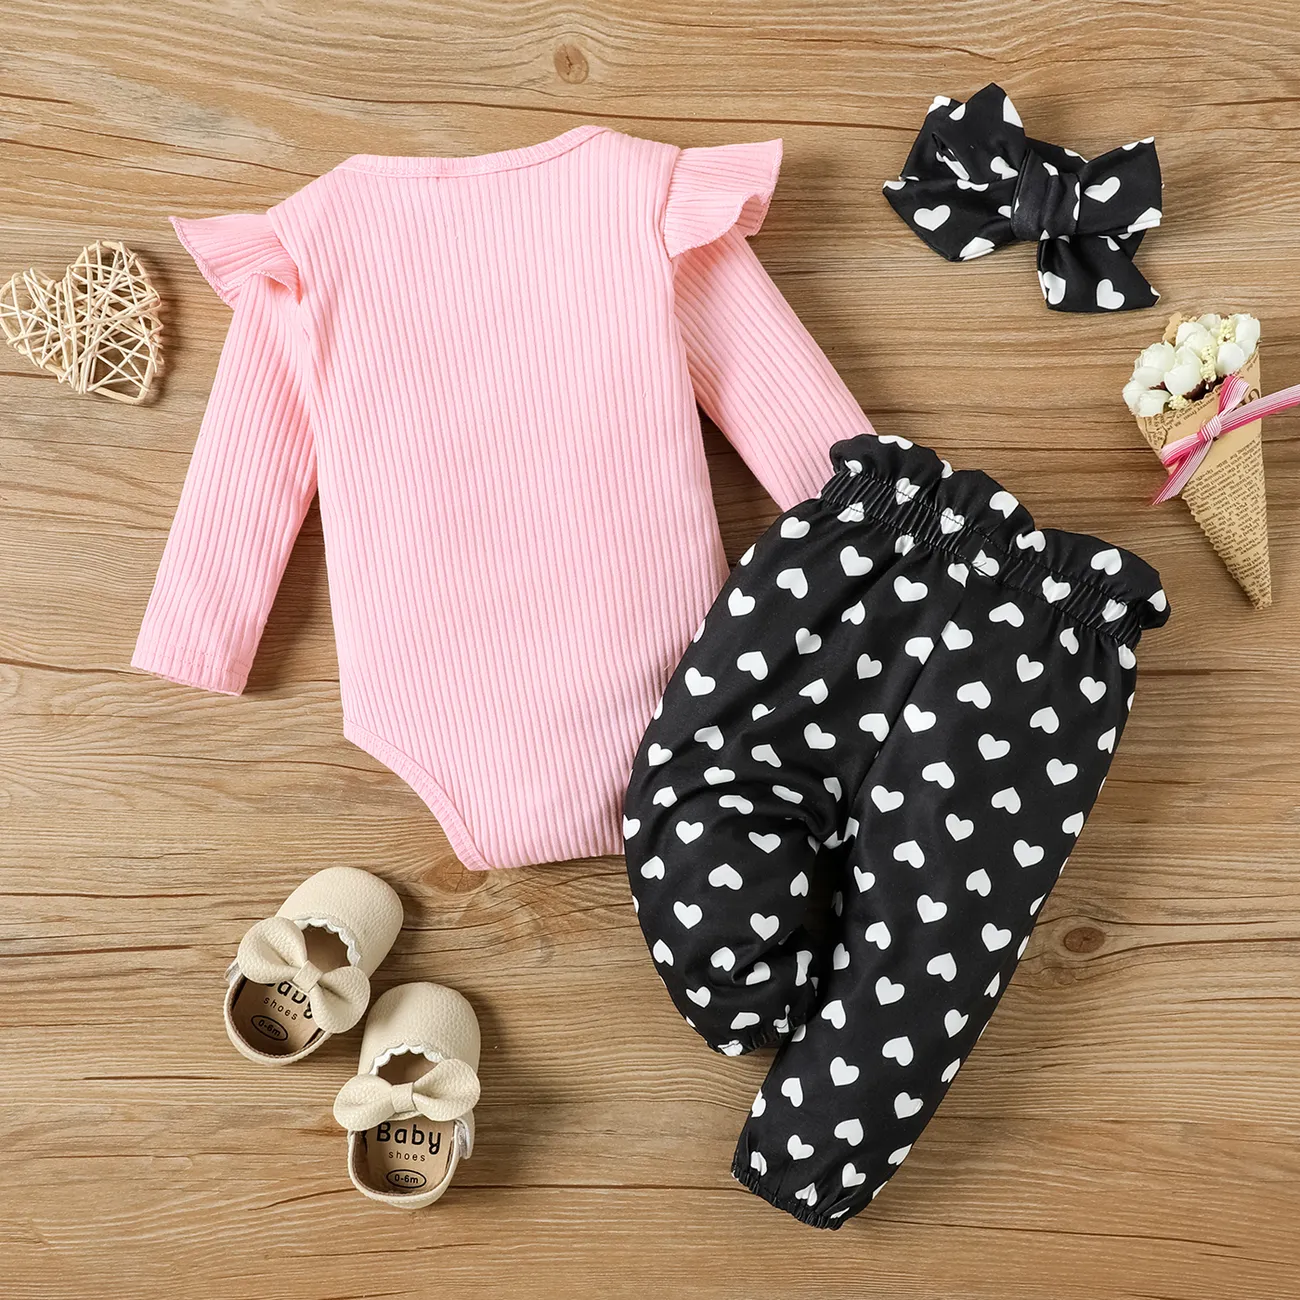 3pcs Baby Girl 95% Cotton Long-sleeve Rib Knit Letter Embroidered Romper and Allover Love Heart Print Pants with Headband Set Pink big image 1